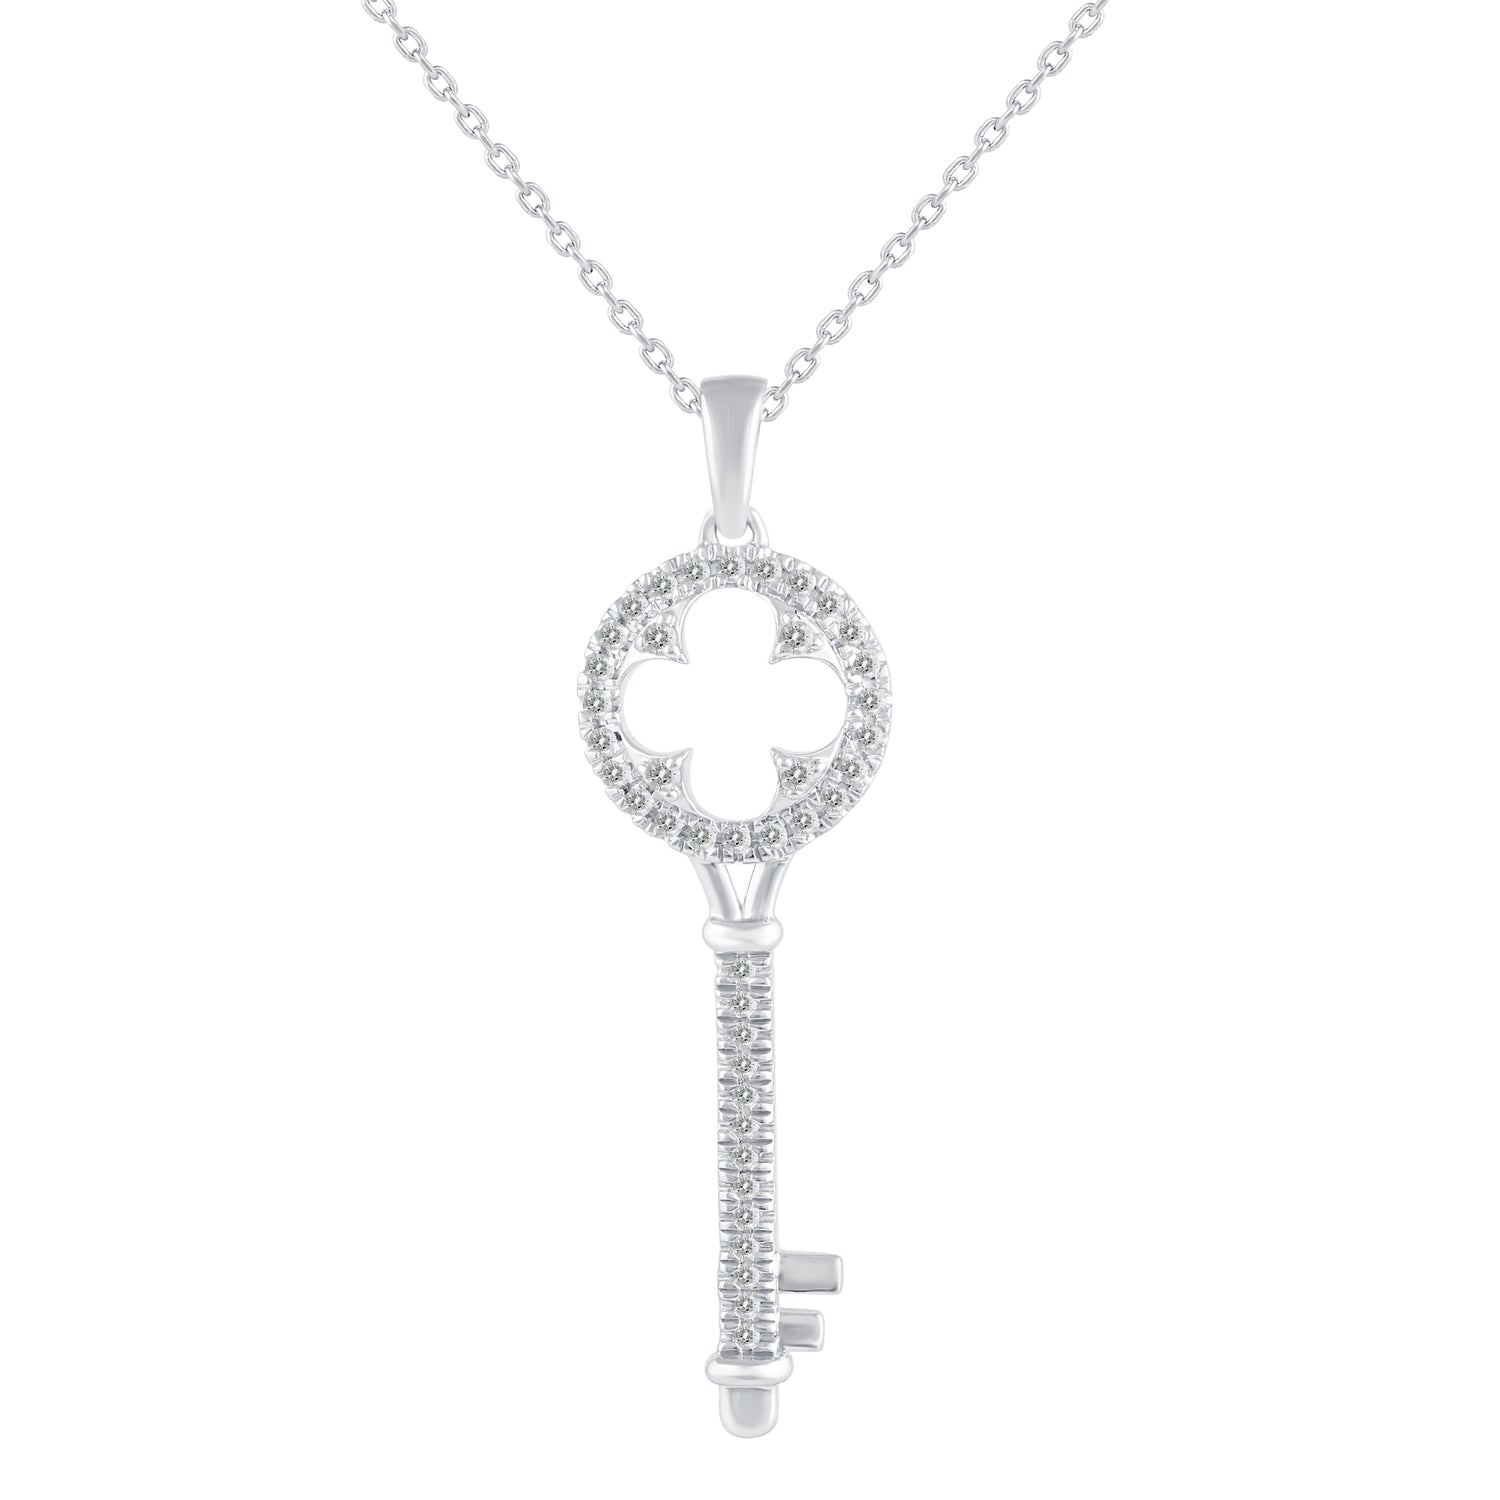 1/5 Cttw Diamond Clover Key Pendant Necklace set in 925 Sterling Silver